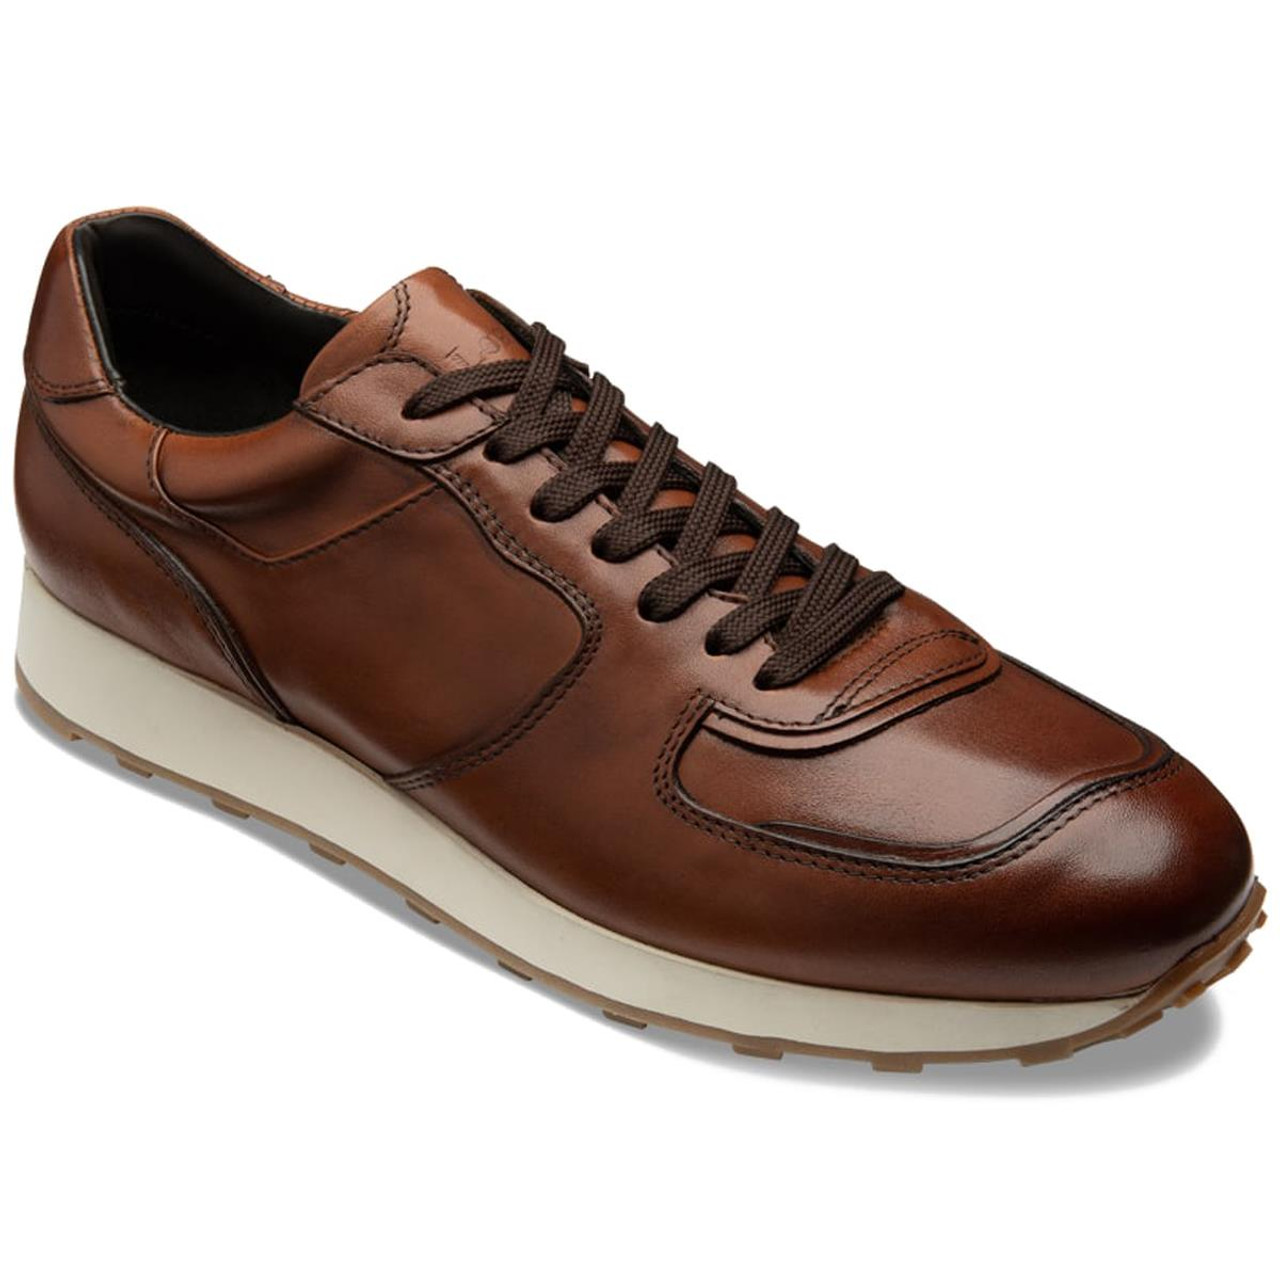 What features do Loake trainers possess to enhance durability and traction?